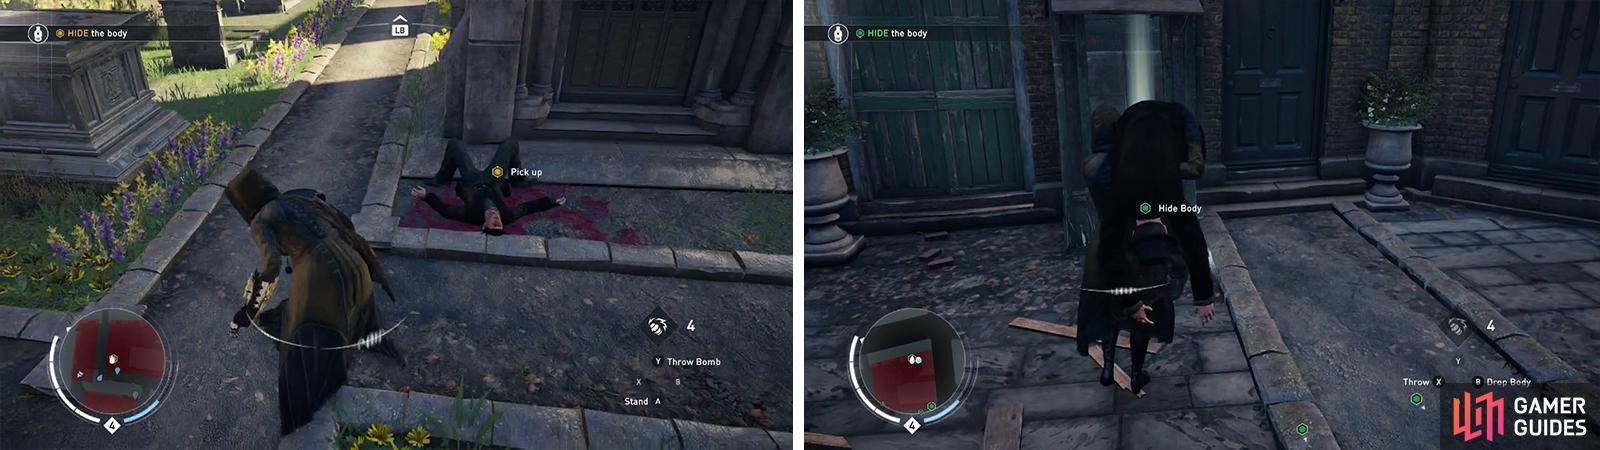 Grab the body from the cemetary (left) and take it to one of the hiding spots (right).